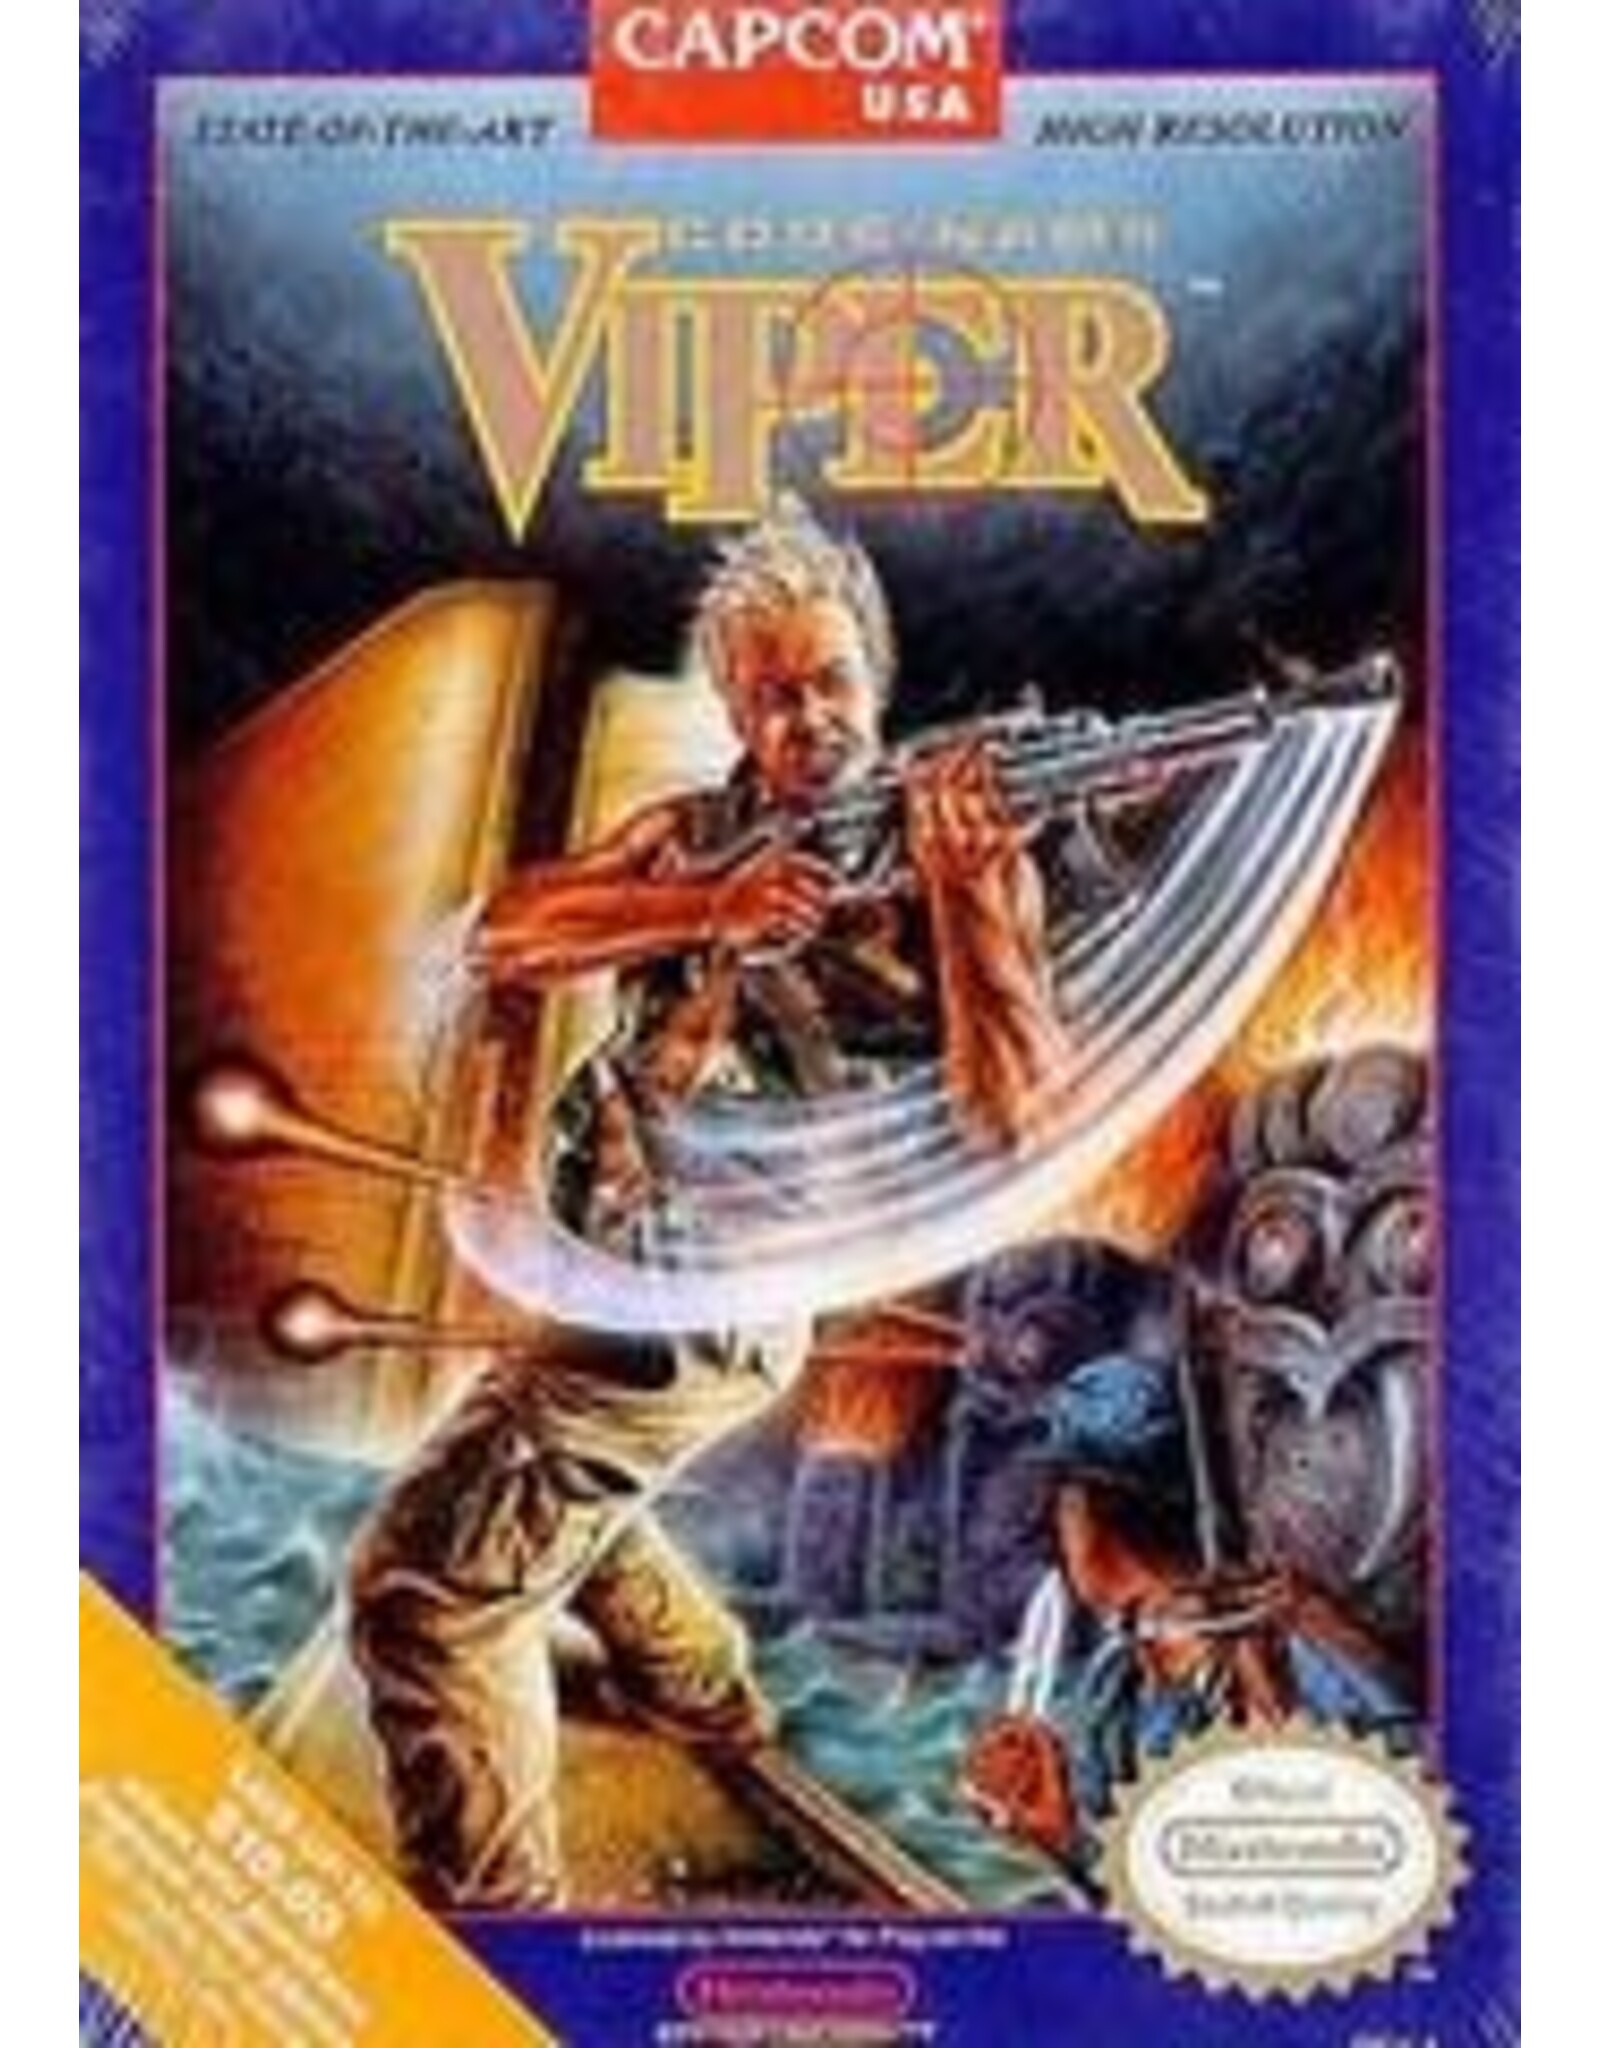 NES Code Name: Viper (Used, Cart Only, Cosmetic Damage)